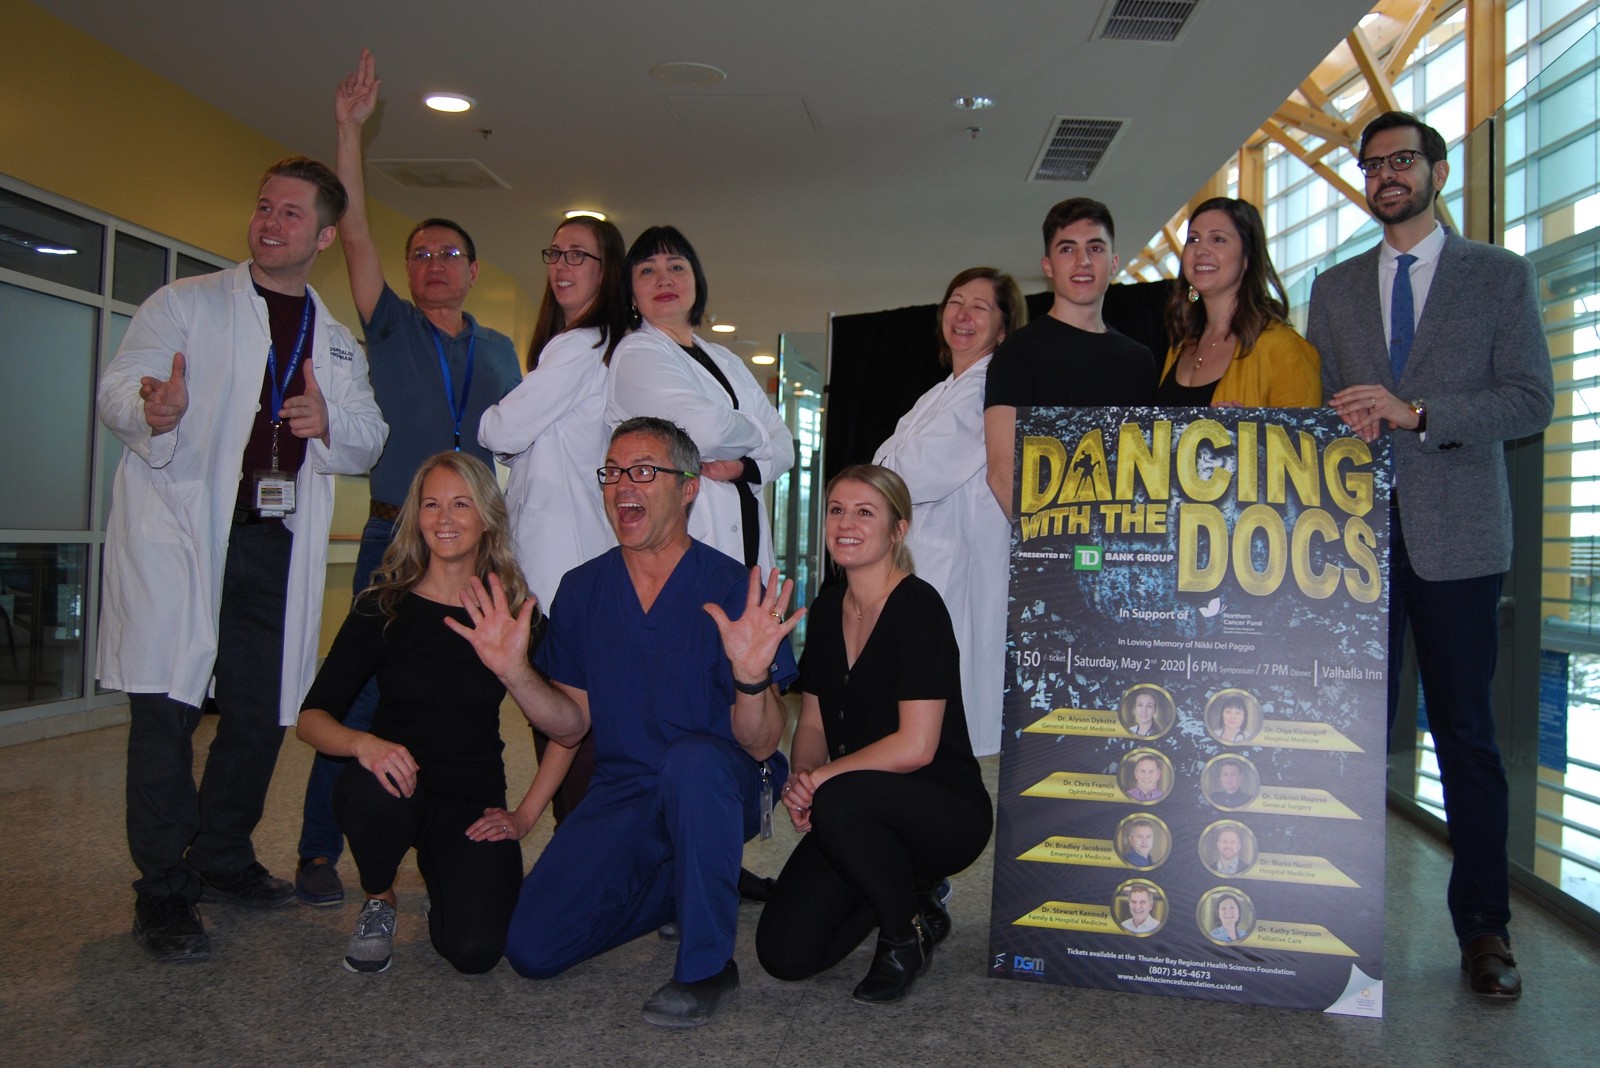 Dancing with the Docs Raises Funds for a New PET Scanner